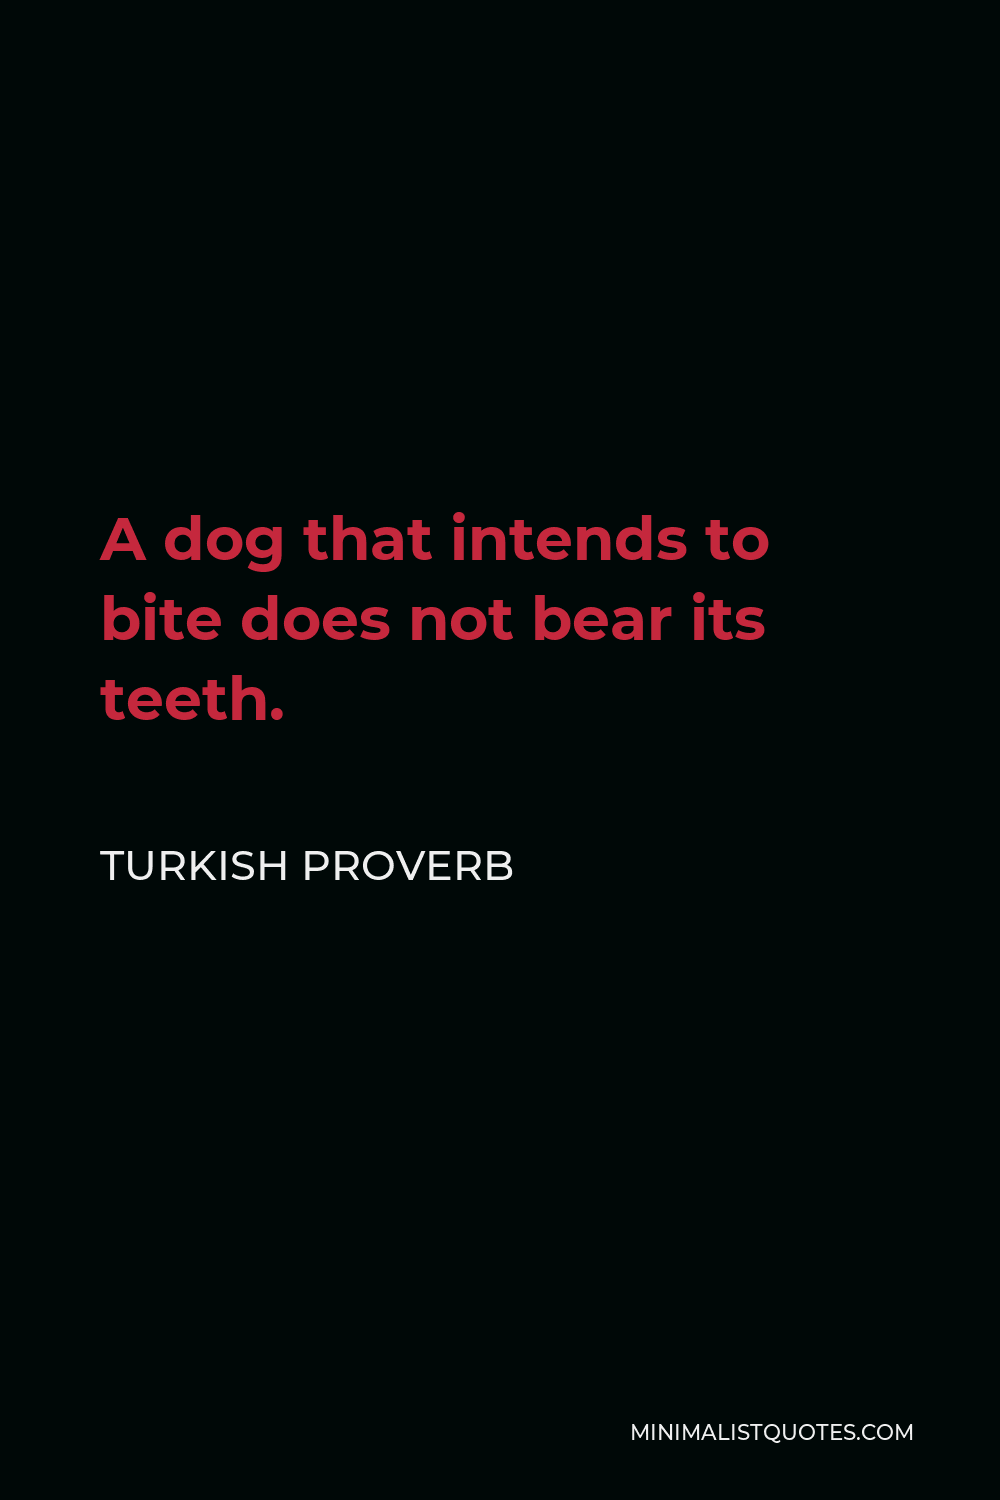 Turkish Proverb Quote - A dog that intends to bite does not bear its teeth.